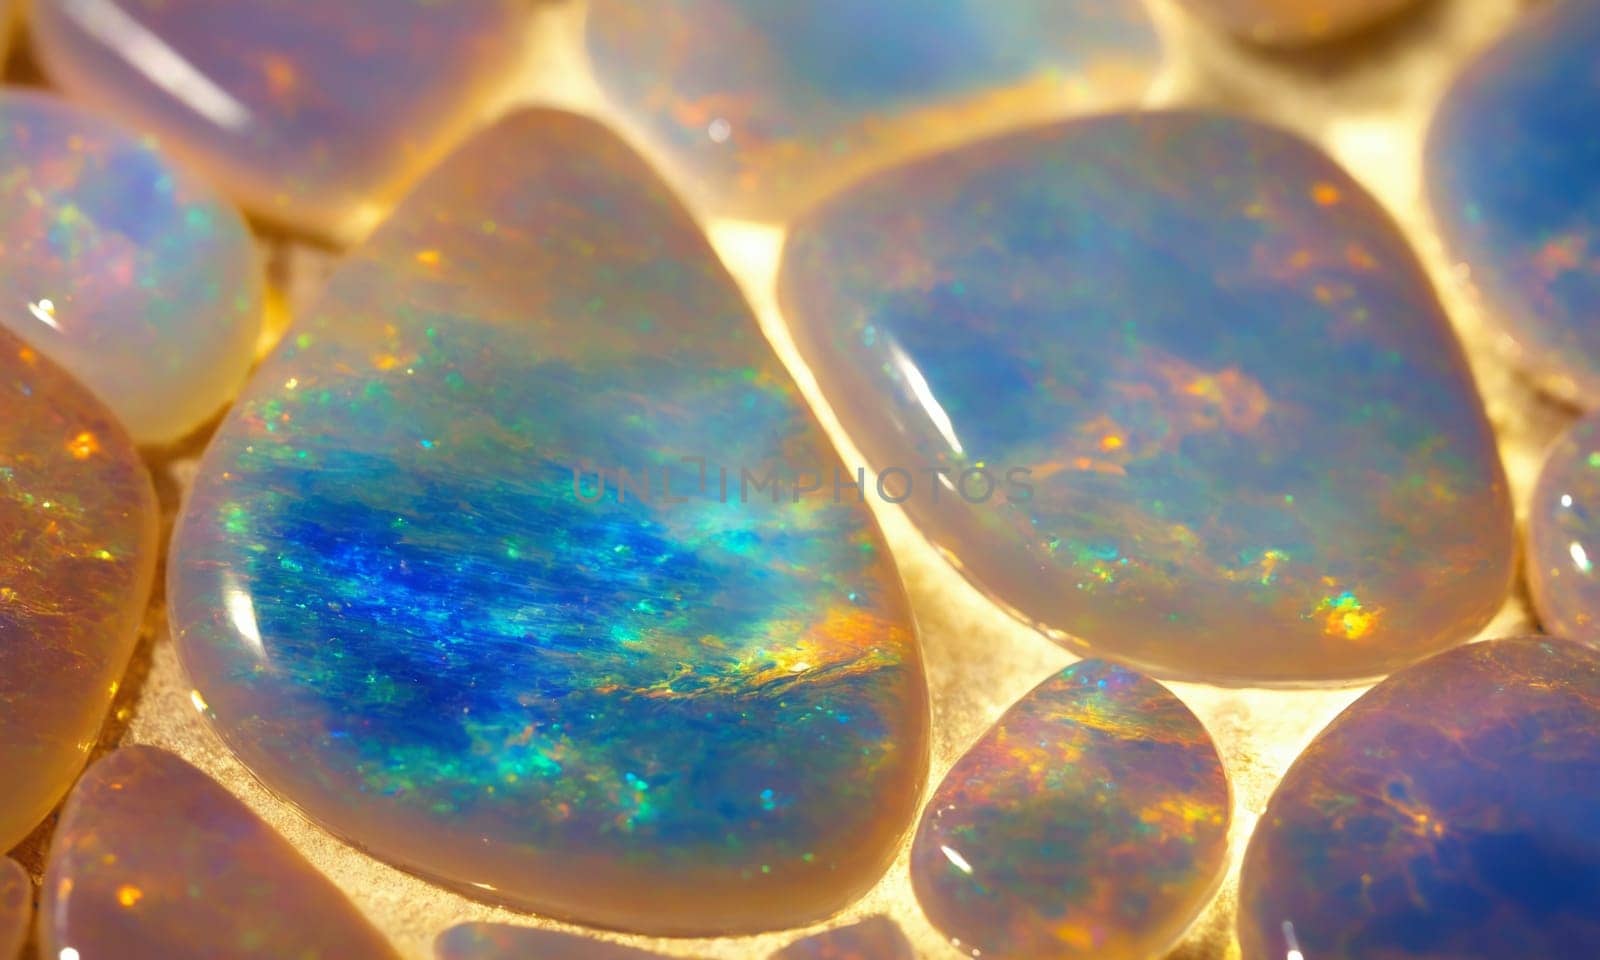 Opal texture for background or design piece of art